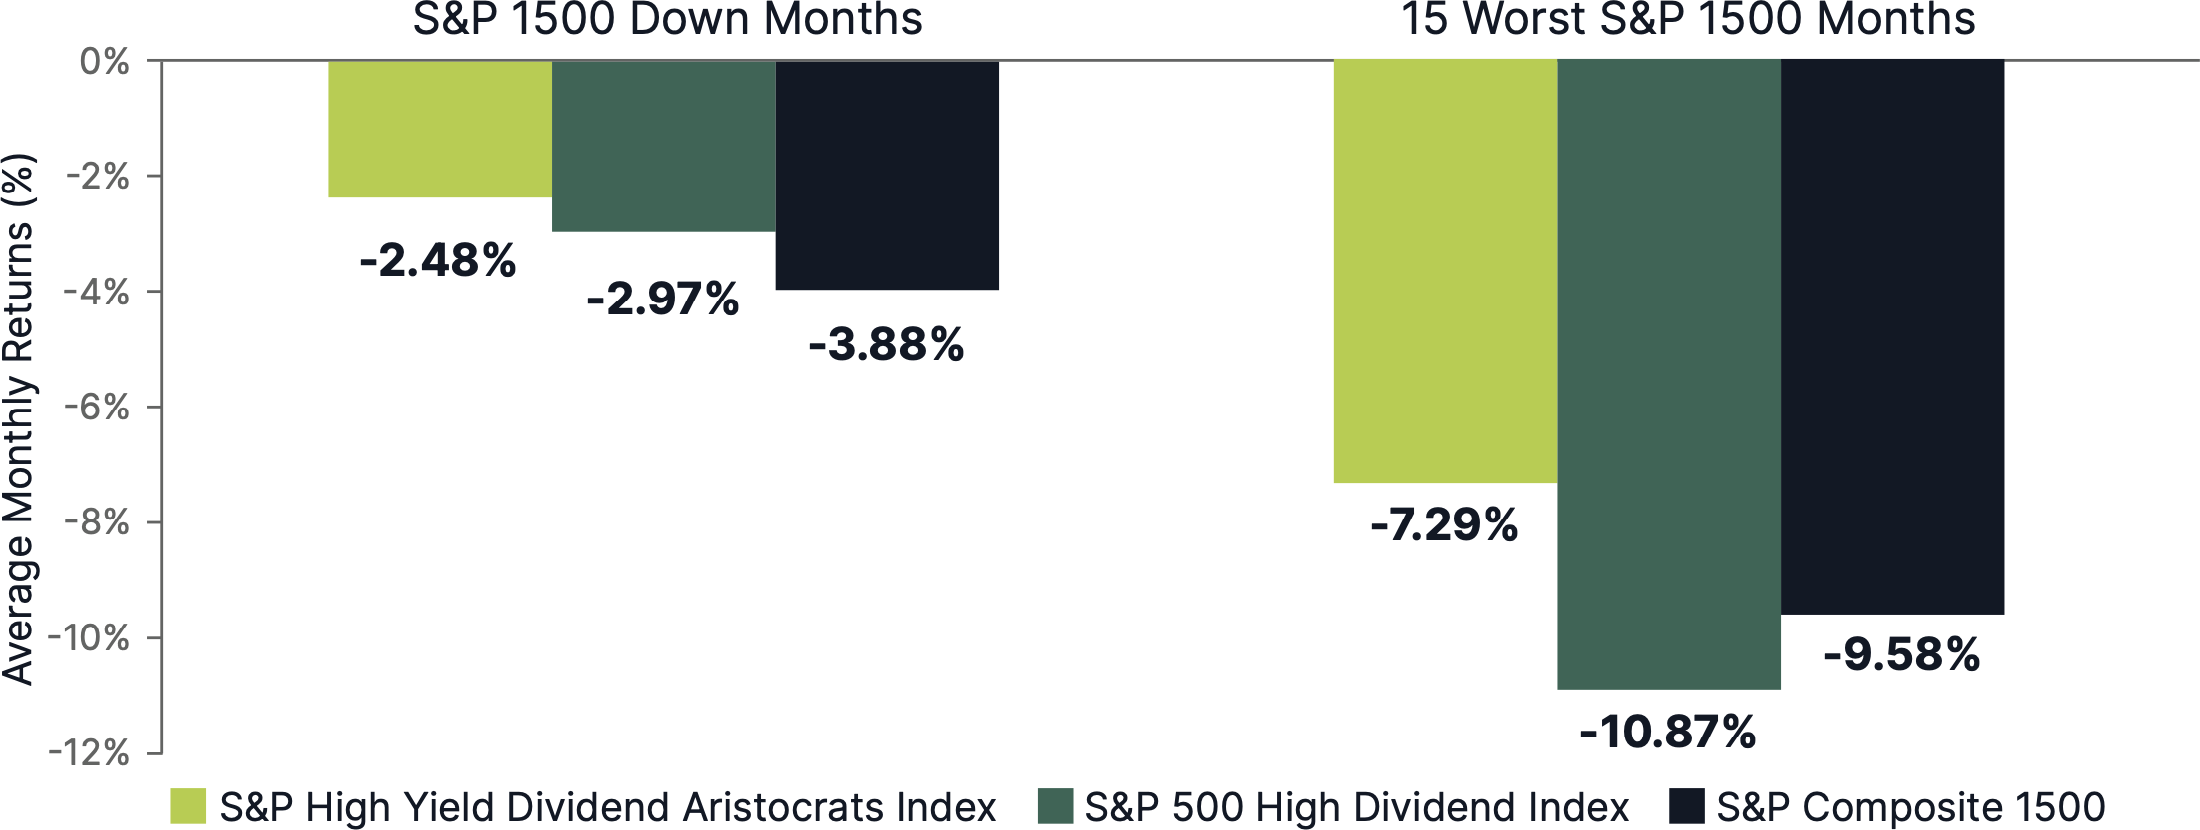 Chart - Returns of S&P 500 Index Stocks by Dividend Policy: Growth of $100